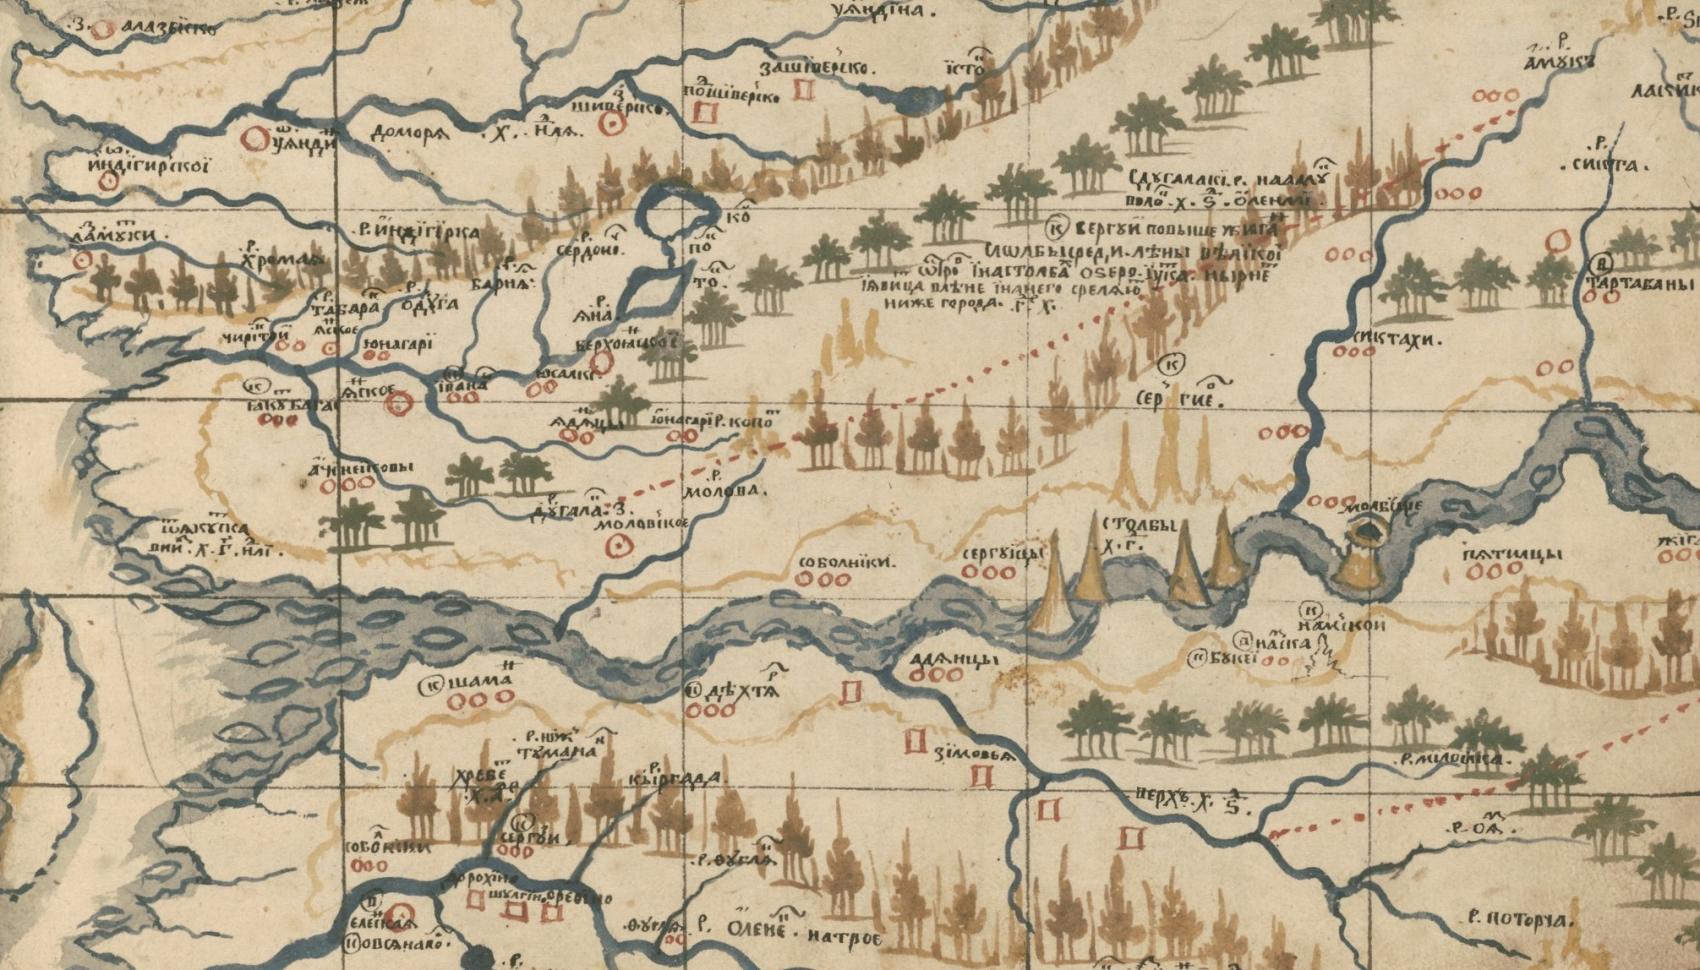 wide river runs horizontally across the map with tributaries; lines of coniferous and deciduous trees shown pictorially